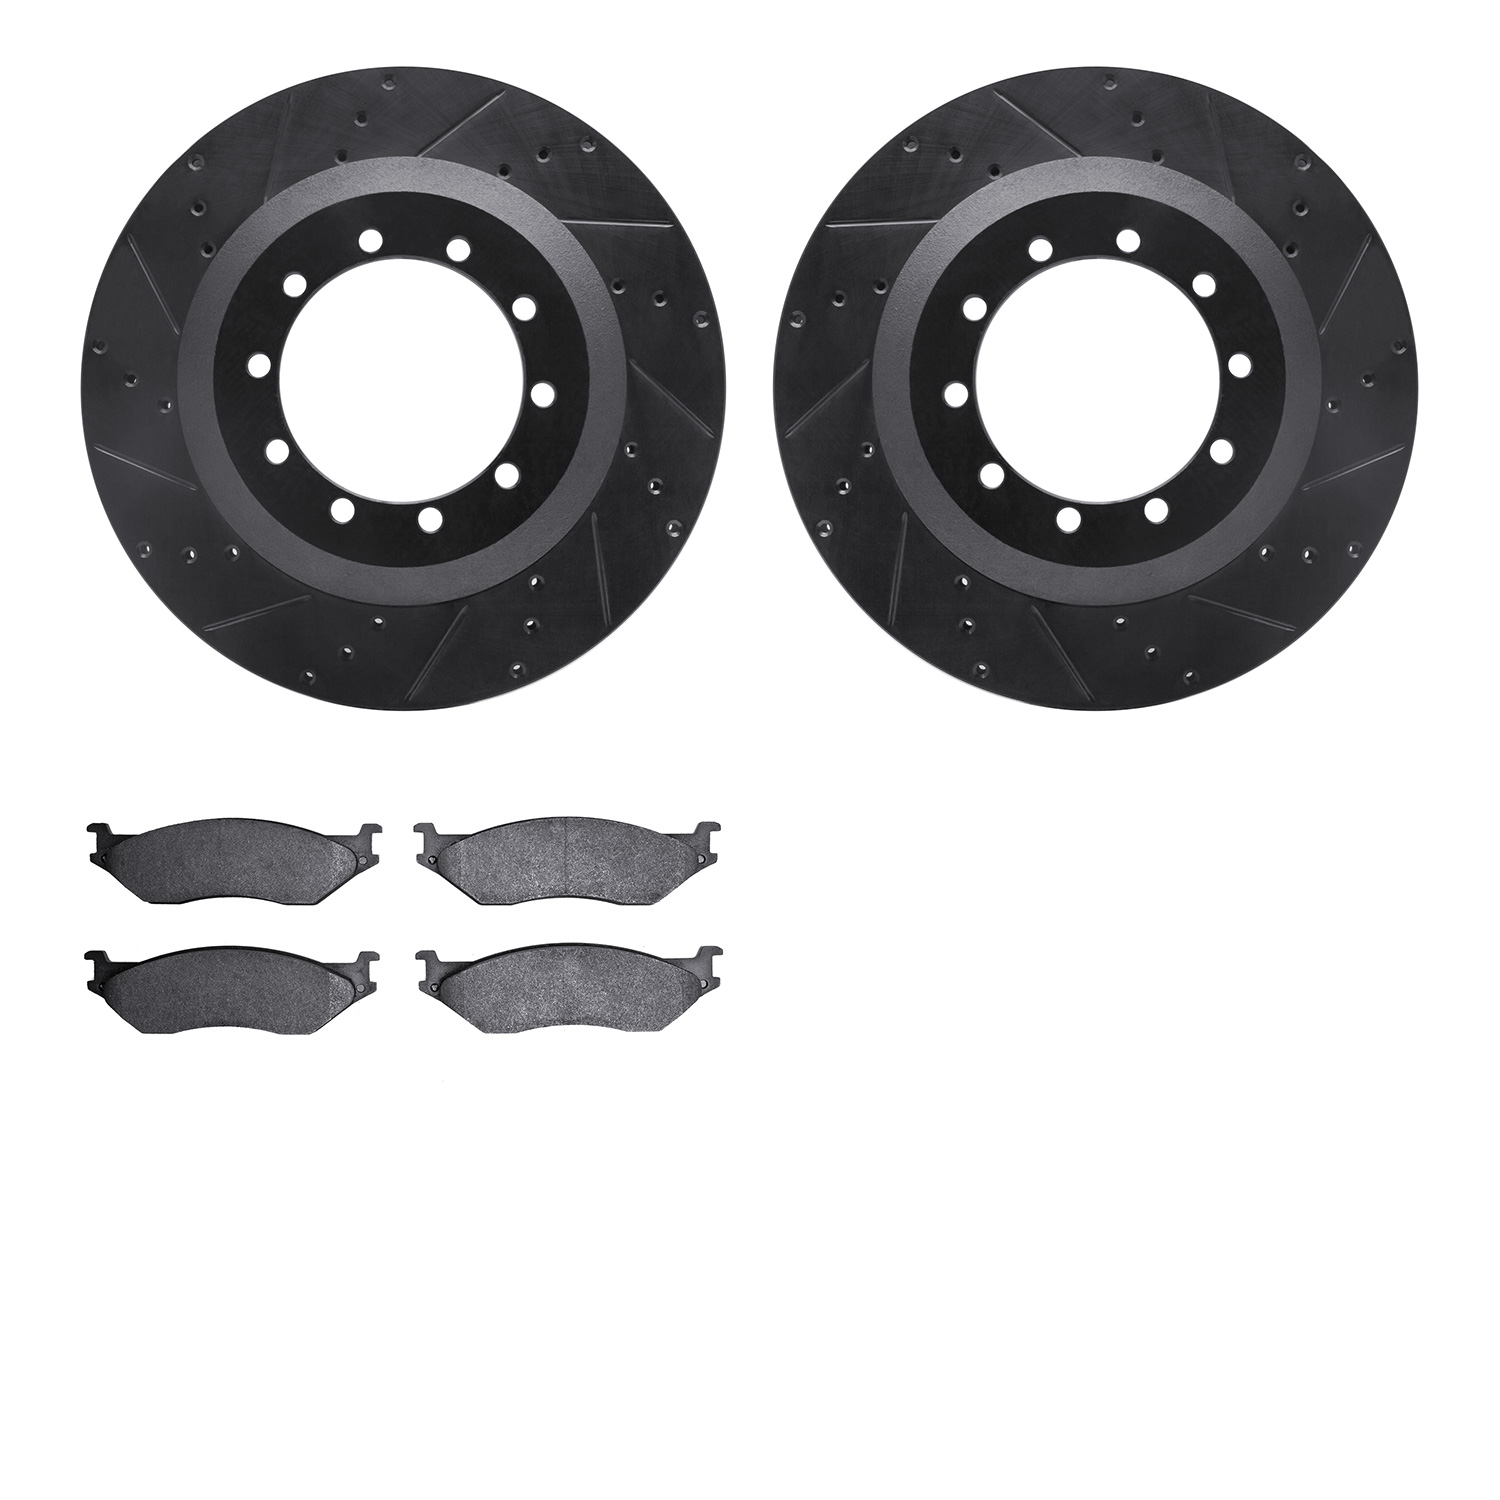 8402-54045 Drilled/Slotted Brake Rotors with Ultimate-Duty Brake Pads Kit [Black], 1999-2004 Ford/Lincoln/Mercury/Mazda, Positio